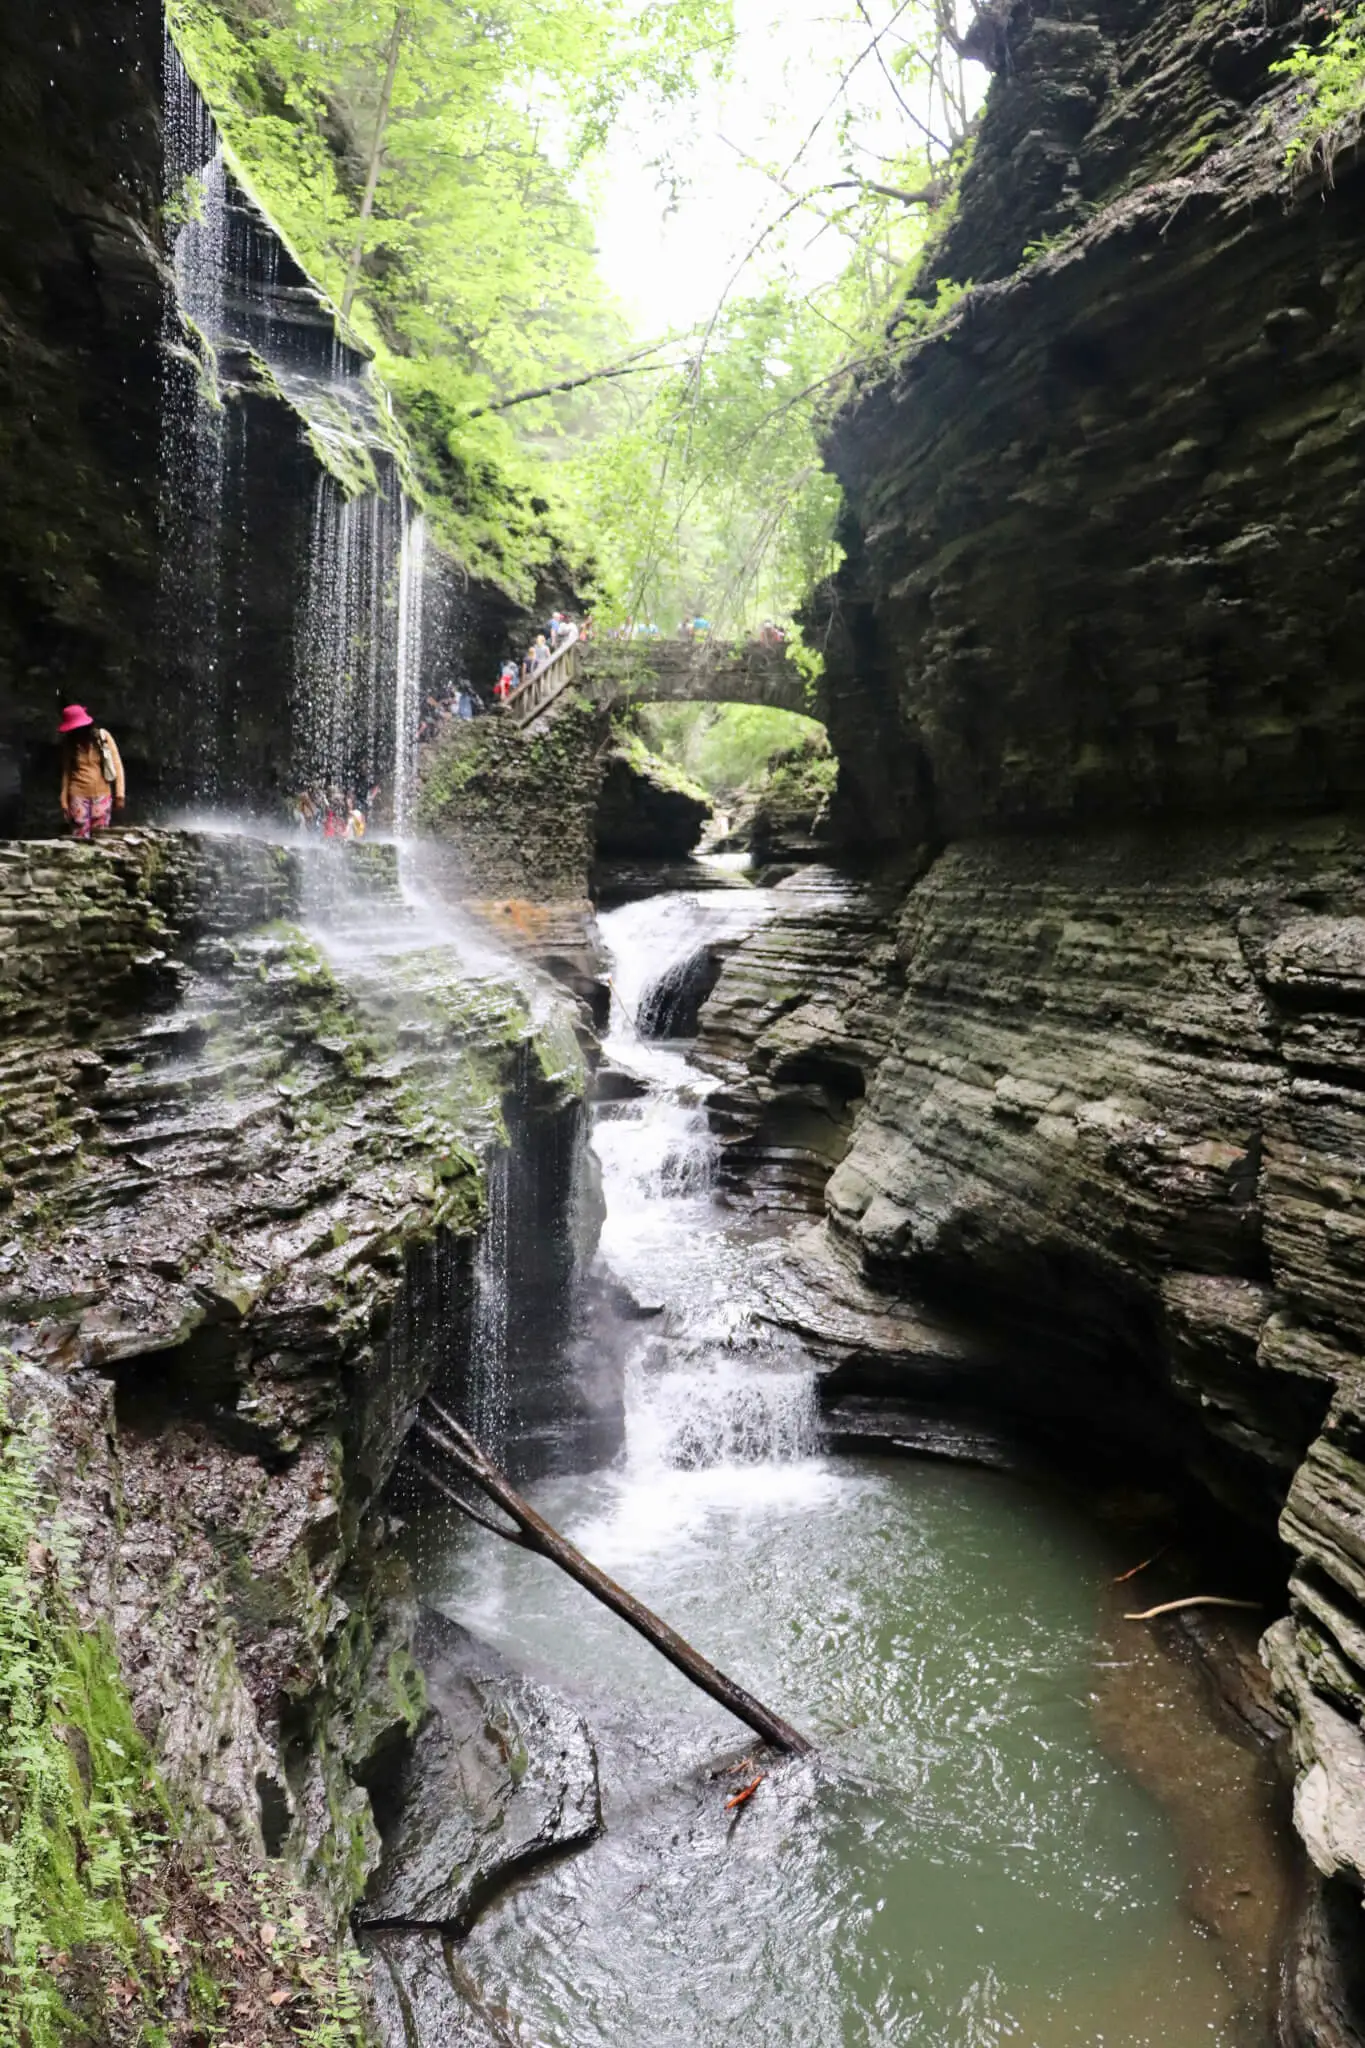 Water running through the gorge in Watkins Glen. The best part of our Finger Lakes weekend getaway was hiking this gorgeous park.